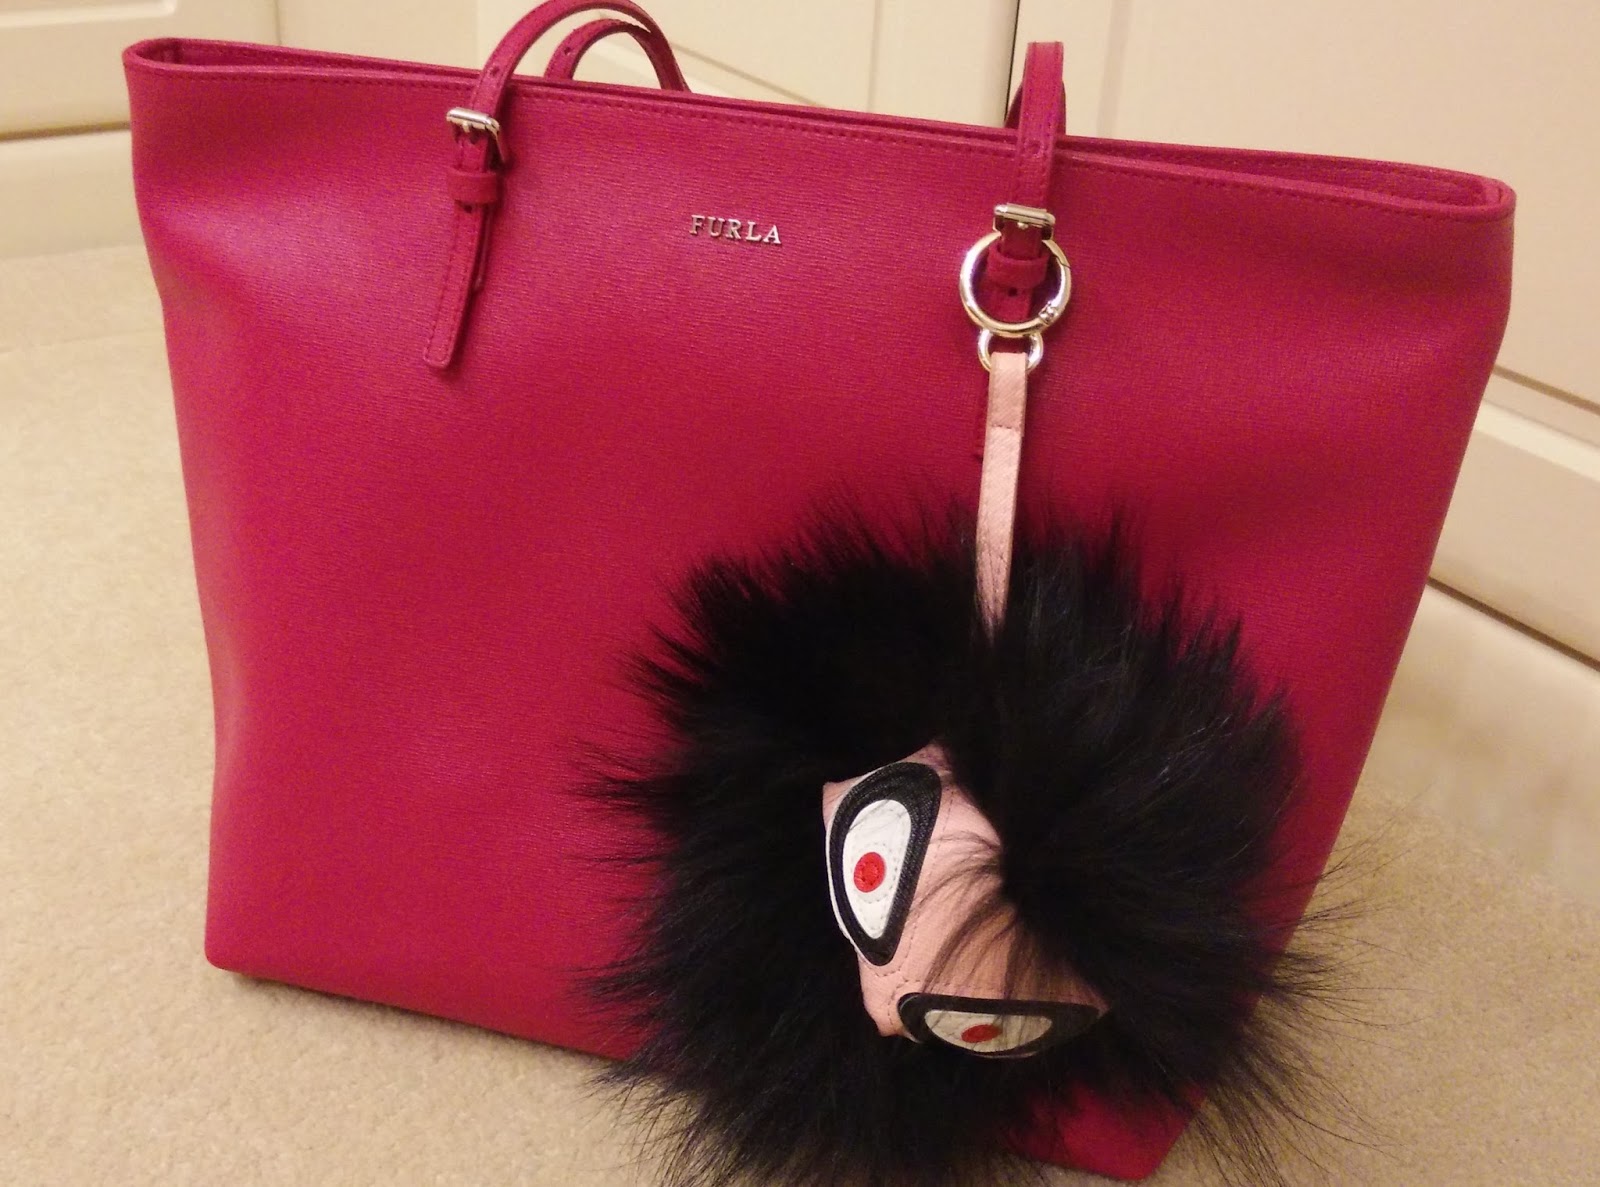 CHESHIRE OAKS OUTLET FURLA OUTLET: NEW BAG! | IT'S A BLOGGER'S WORLD